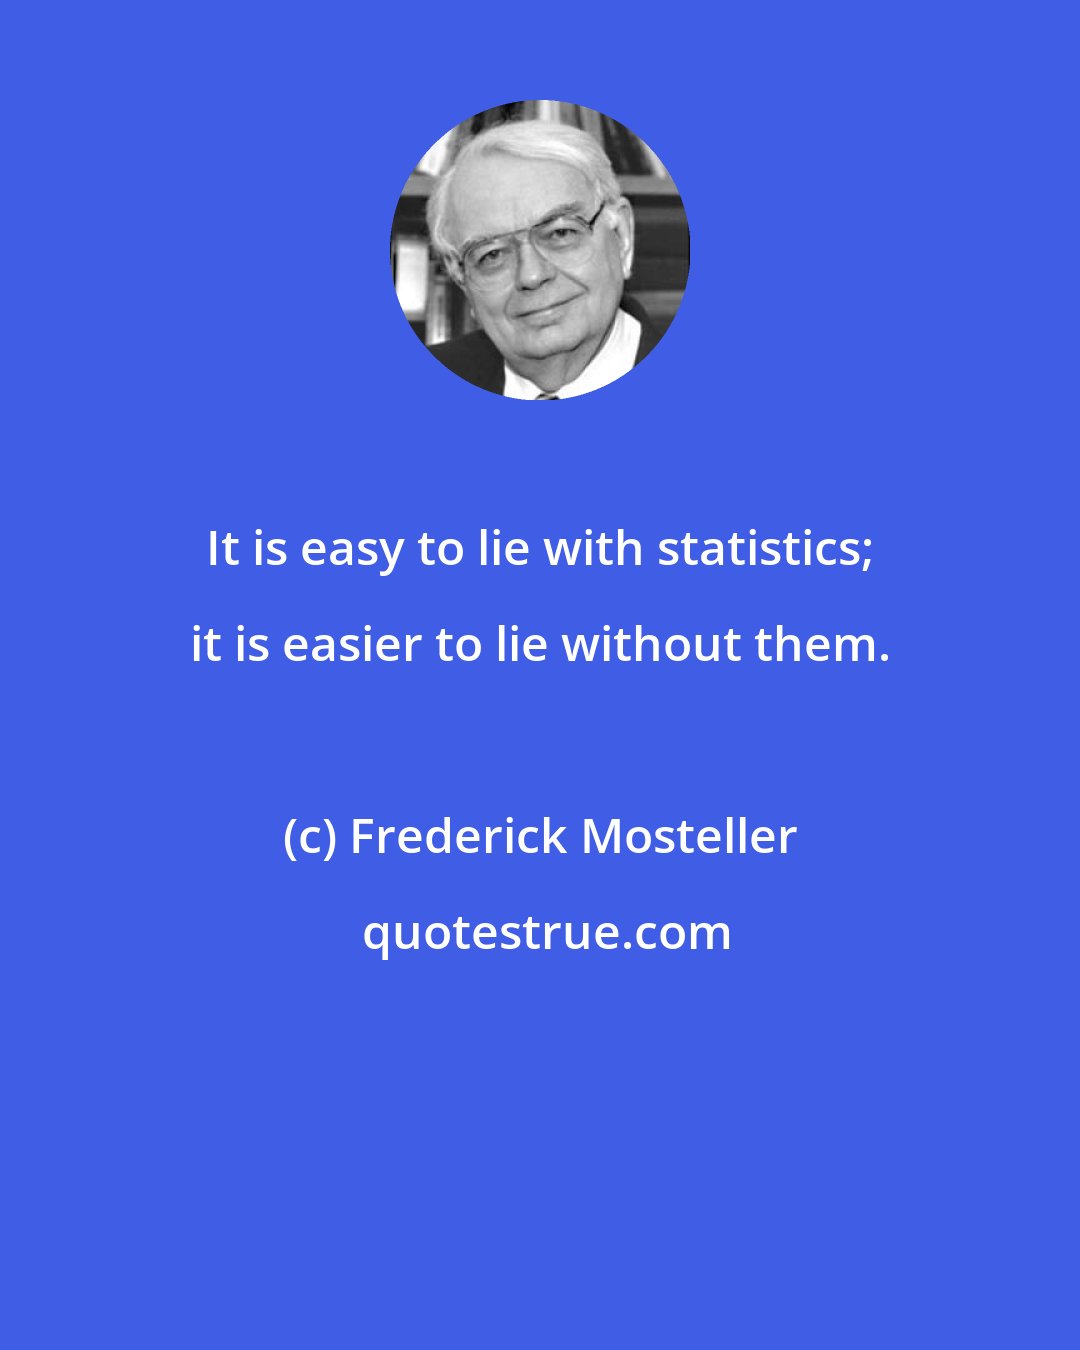 Frederick Mosteller: It is easy to lie with statistics; it is easier to lie without them.